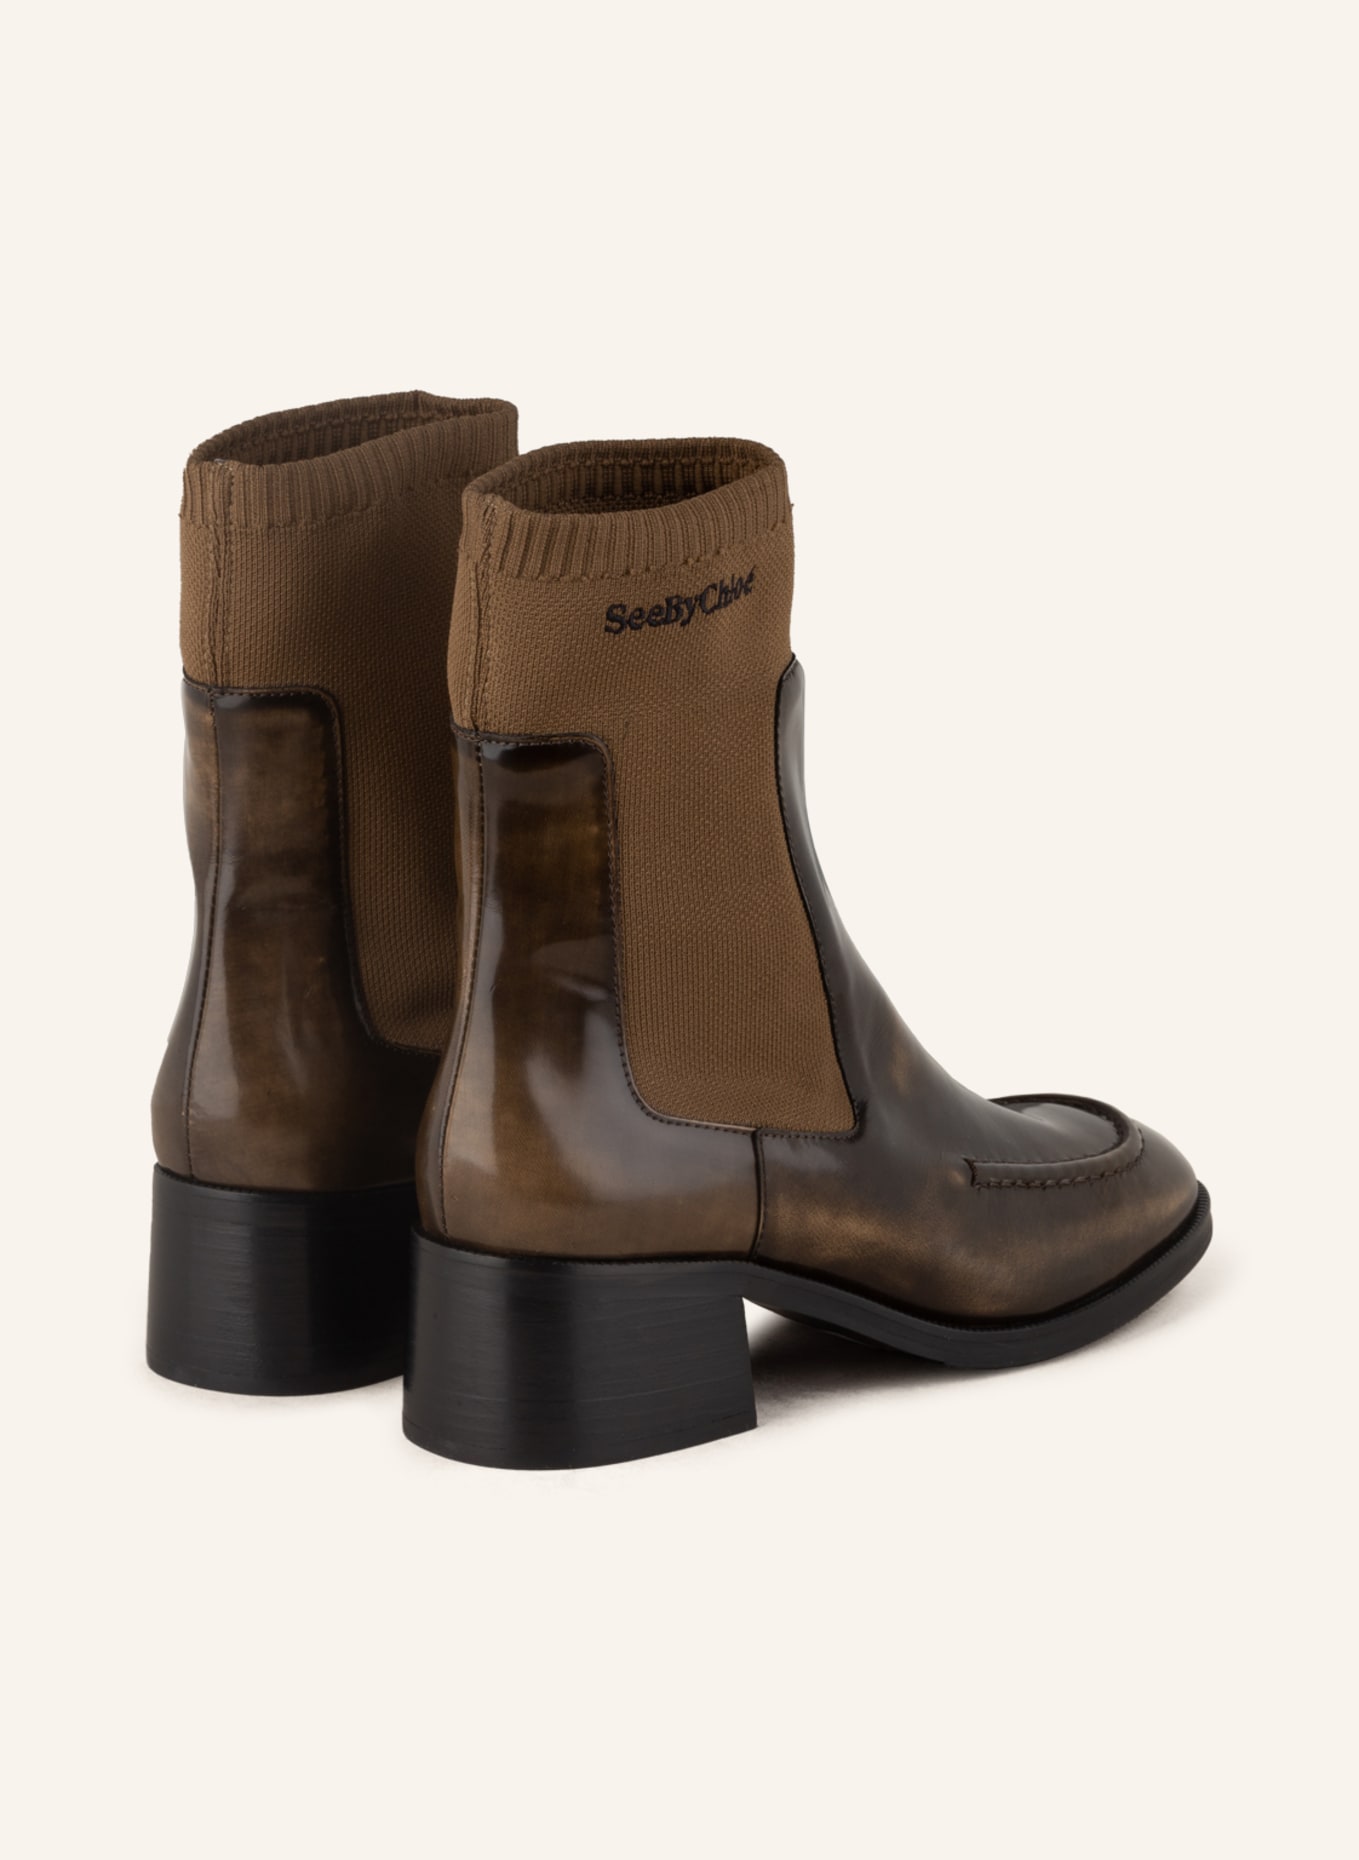 SEE BY CHLOÉ  boots WENDY, Color: 110/415 Olive (Image 2)